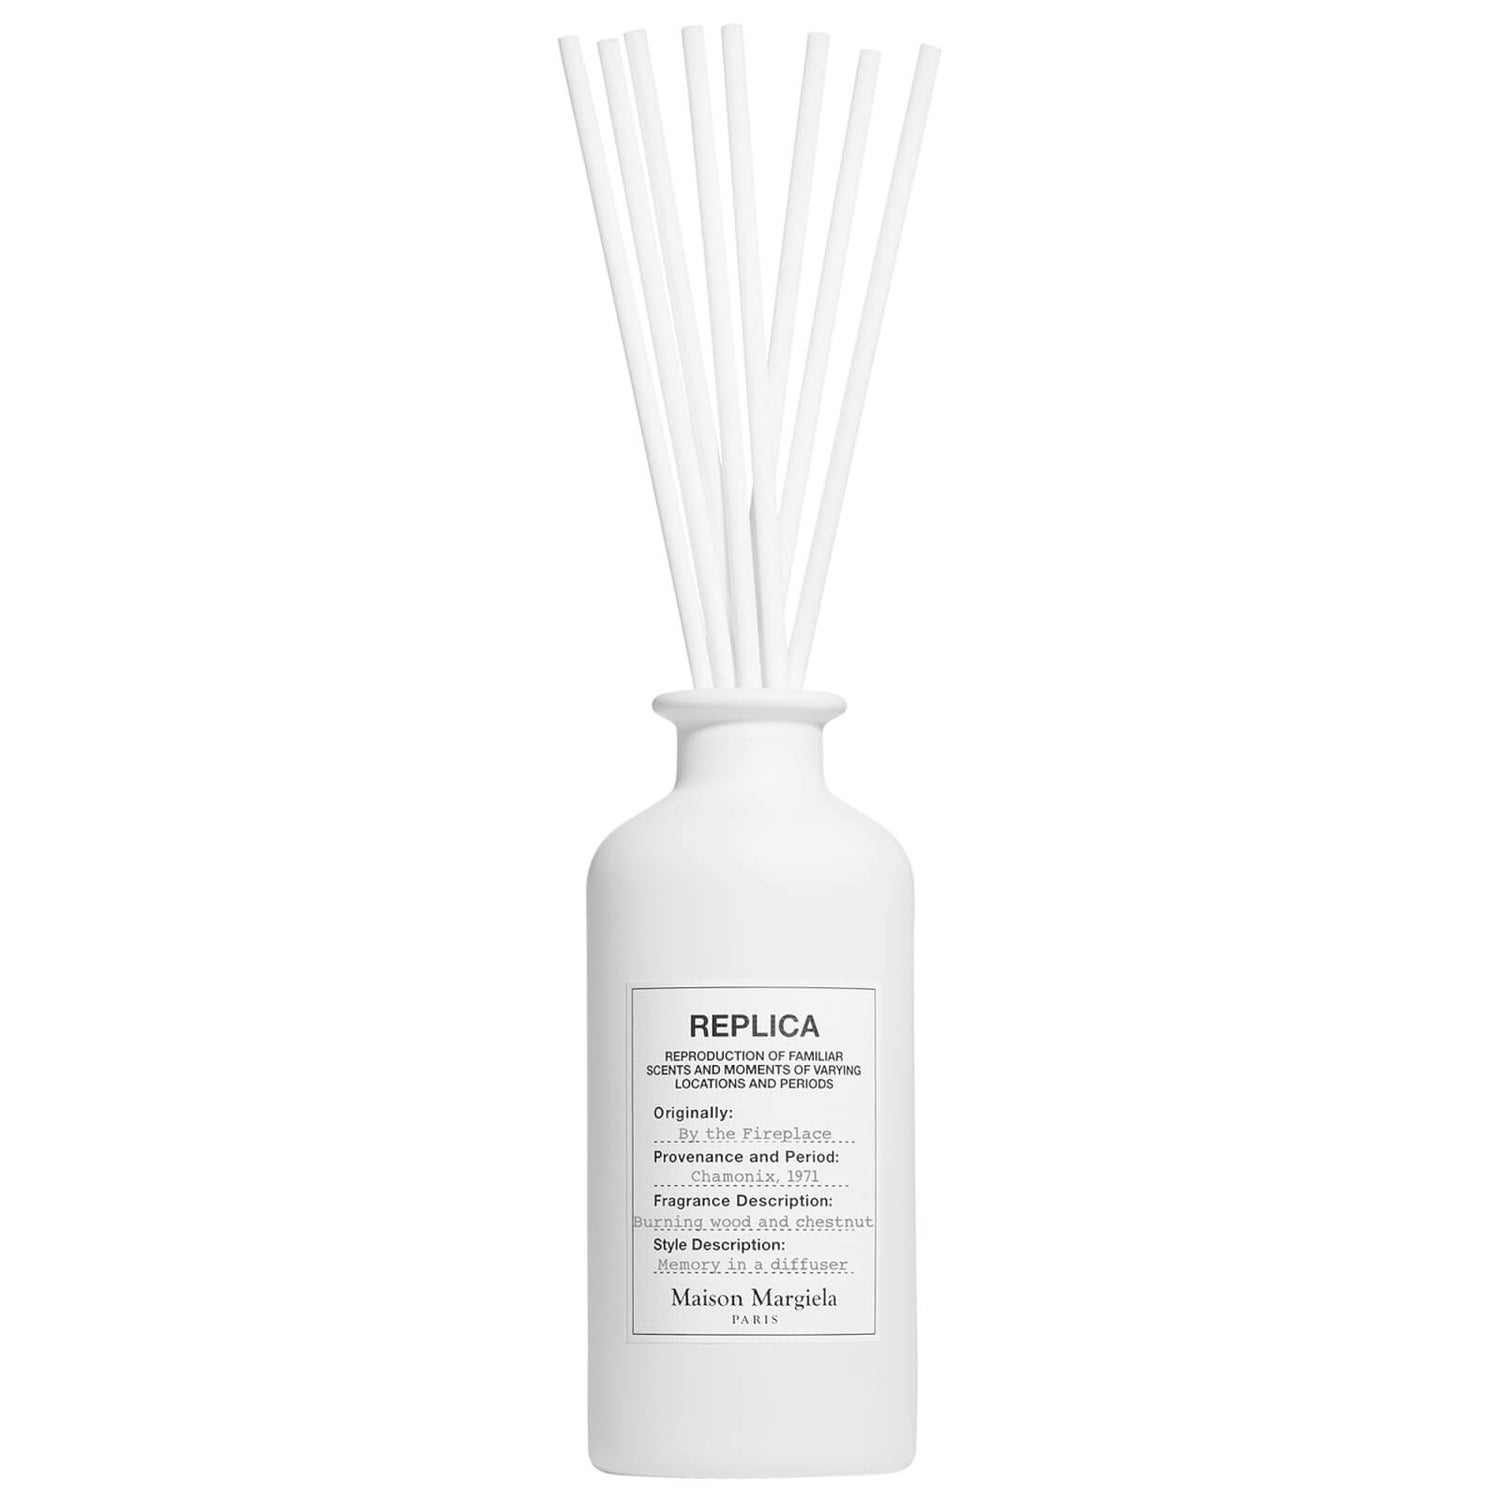 Maison Margiela Replica By The Fireplace Diffuser 170ml